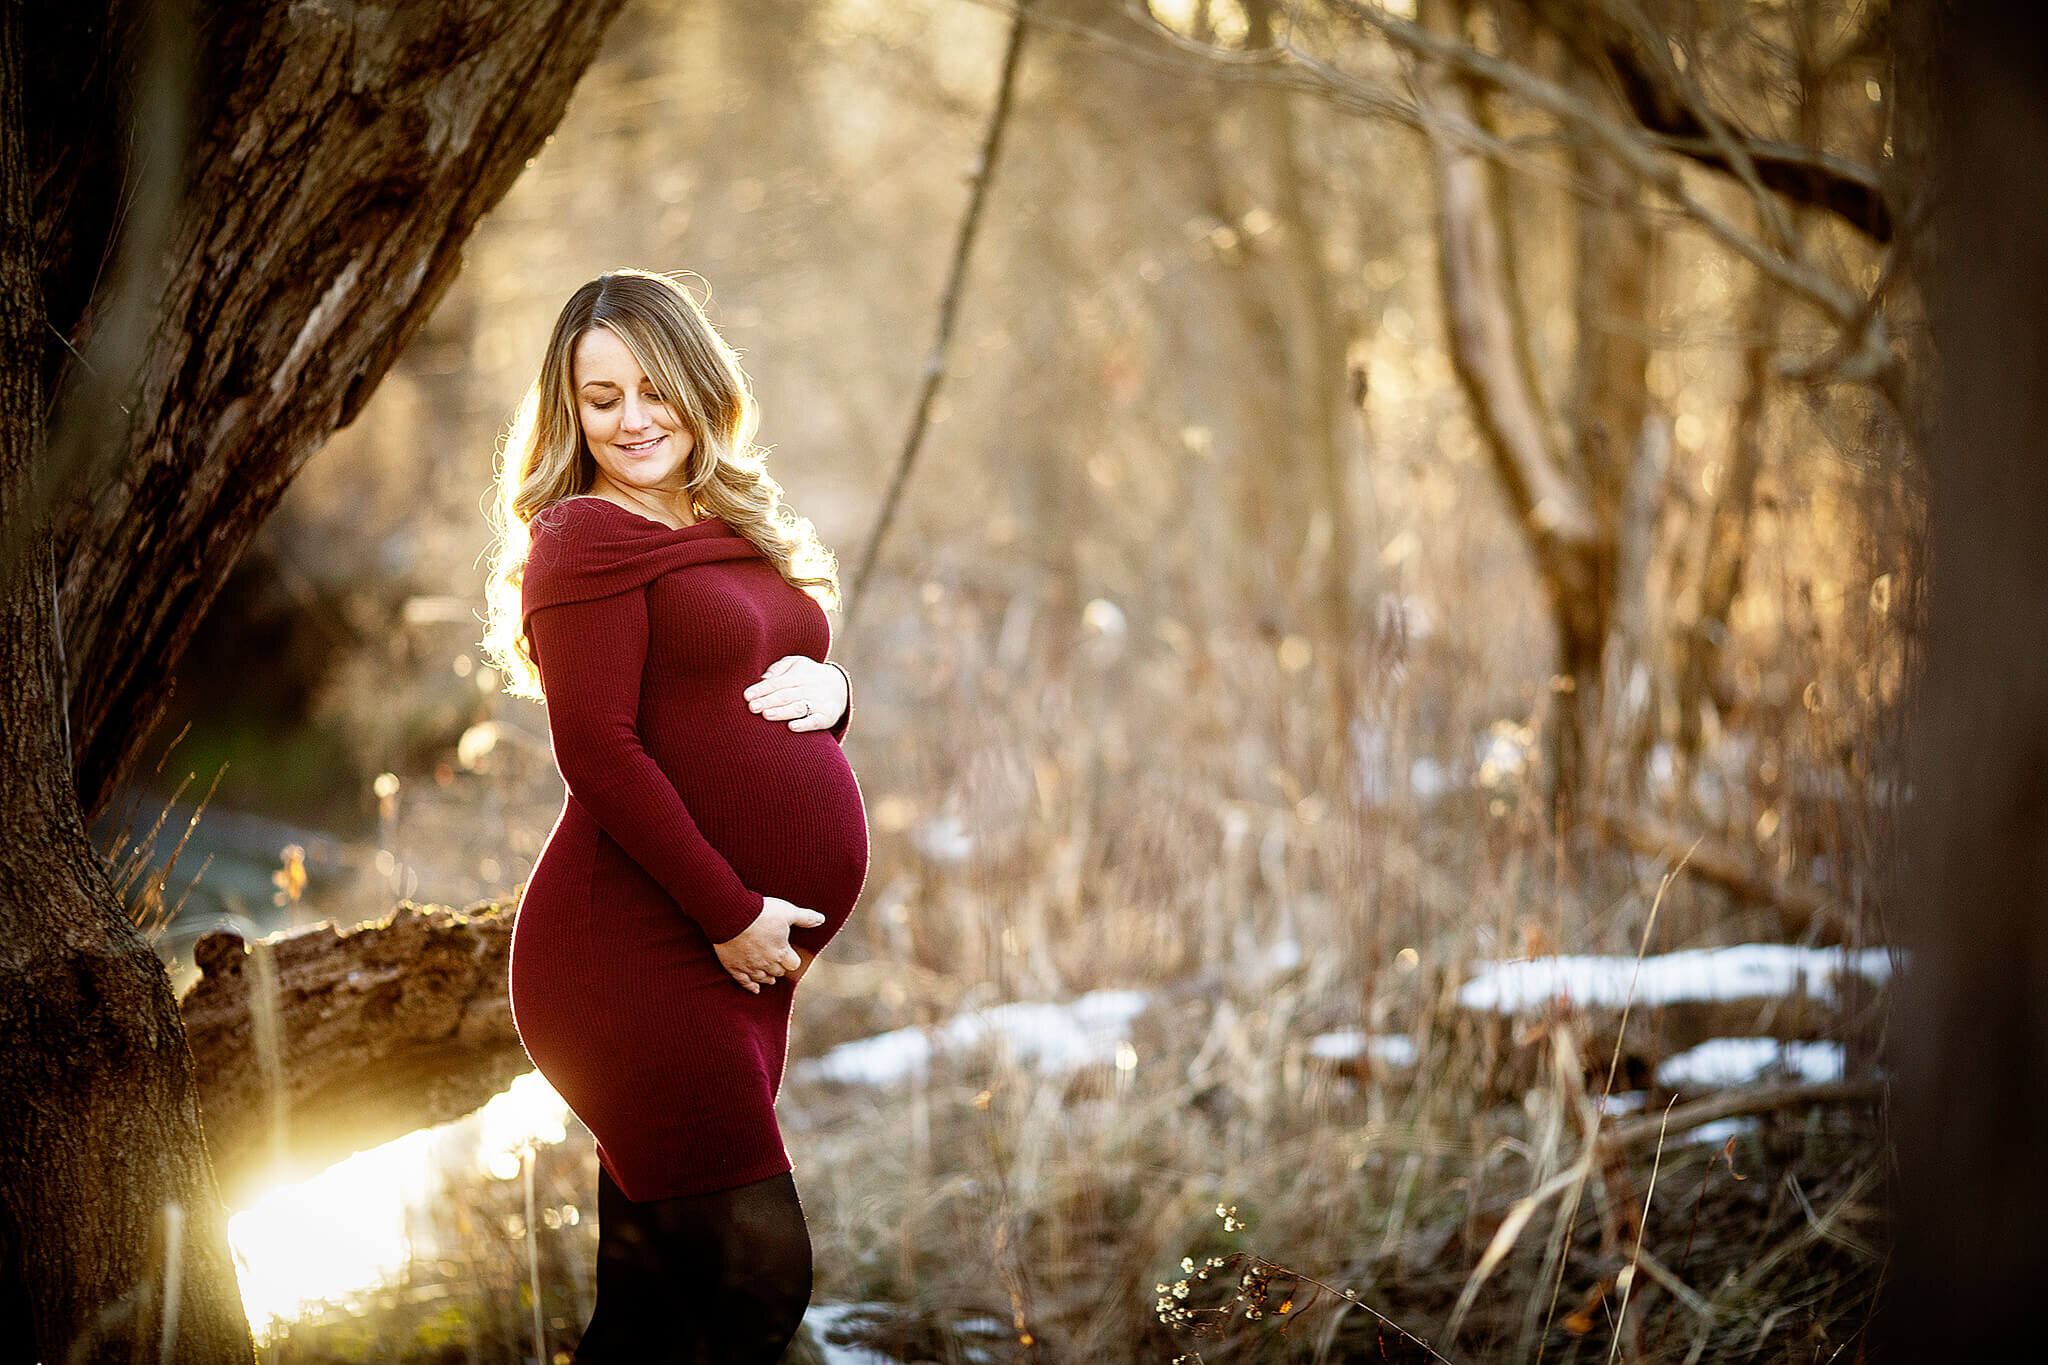 Pregnant women who is wearing a red dress standing in woods during the winter